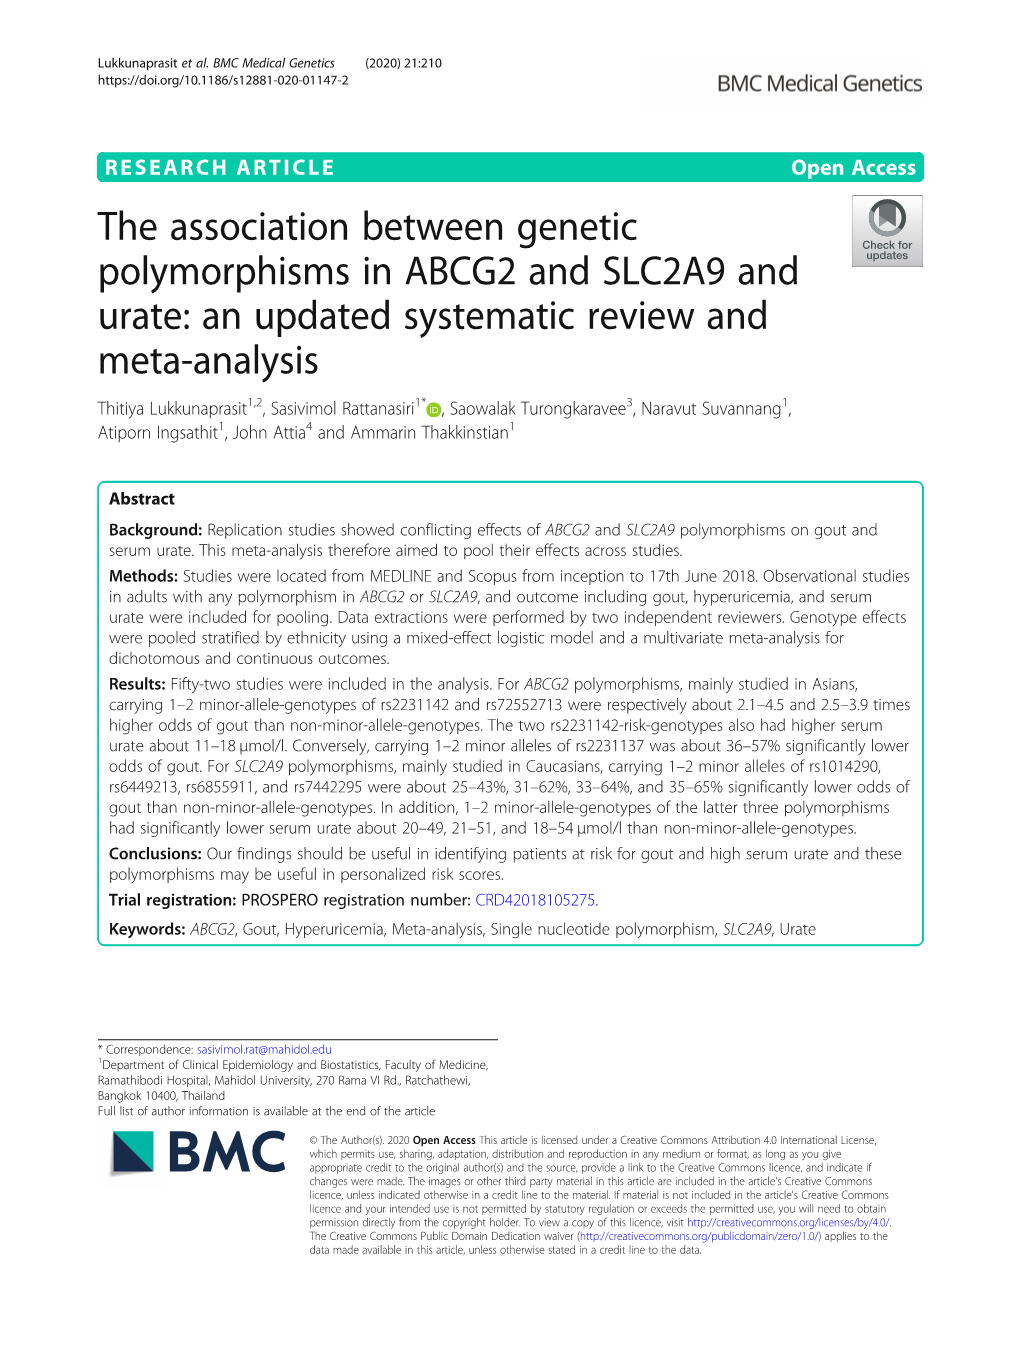 The Association Between Genetic Polymorphisms in ABCG2 And